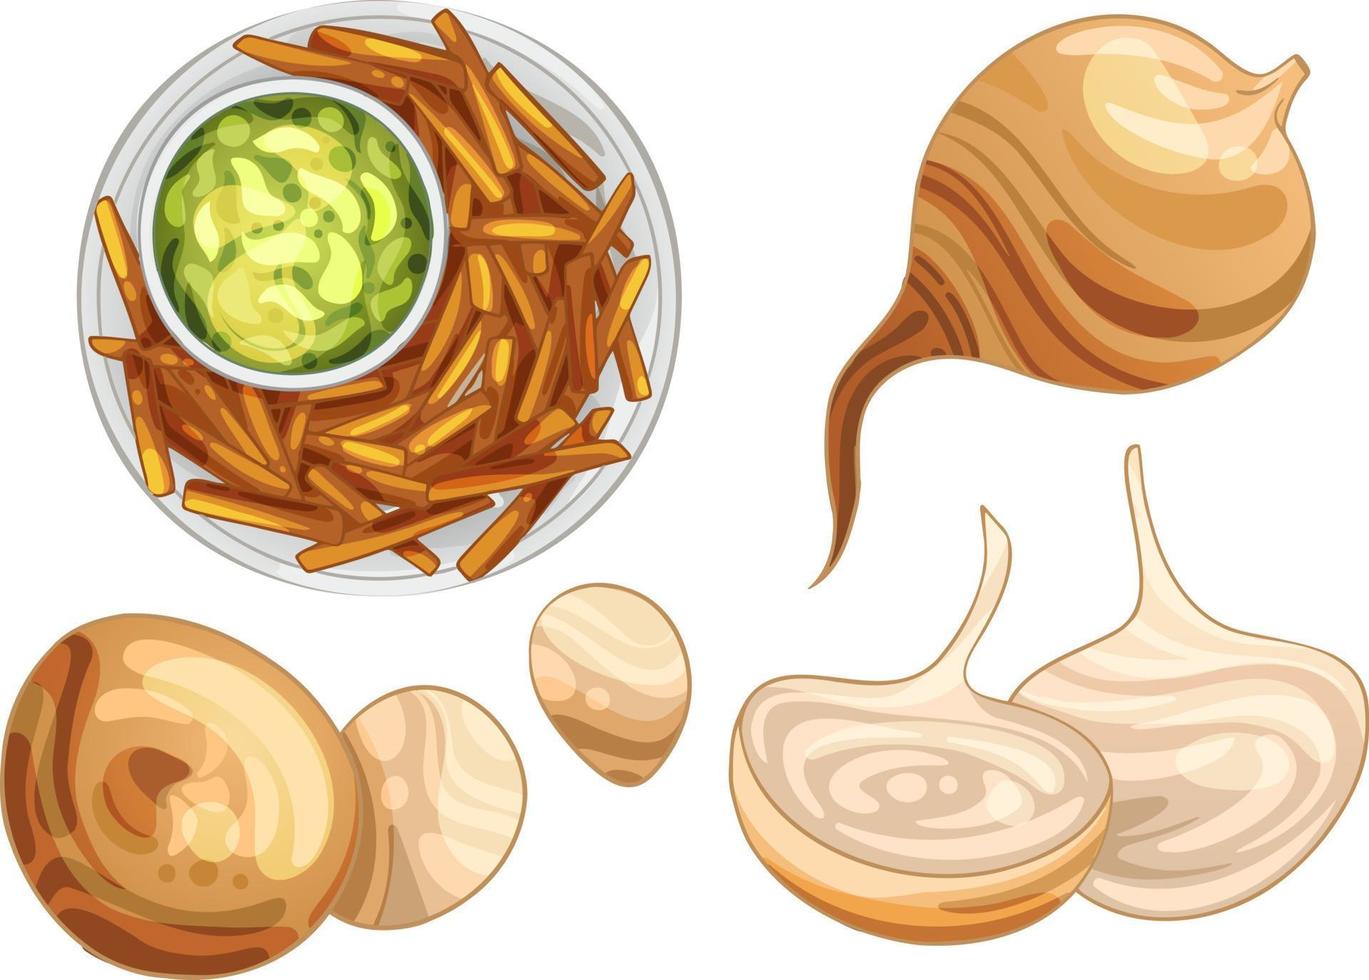 jicama fruit, Fried pieces of jicama with spices and guacamole sauce vector